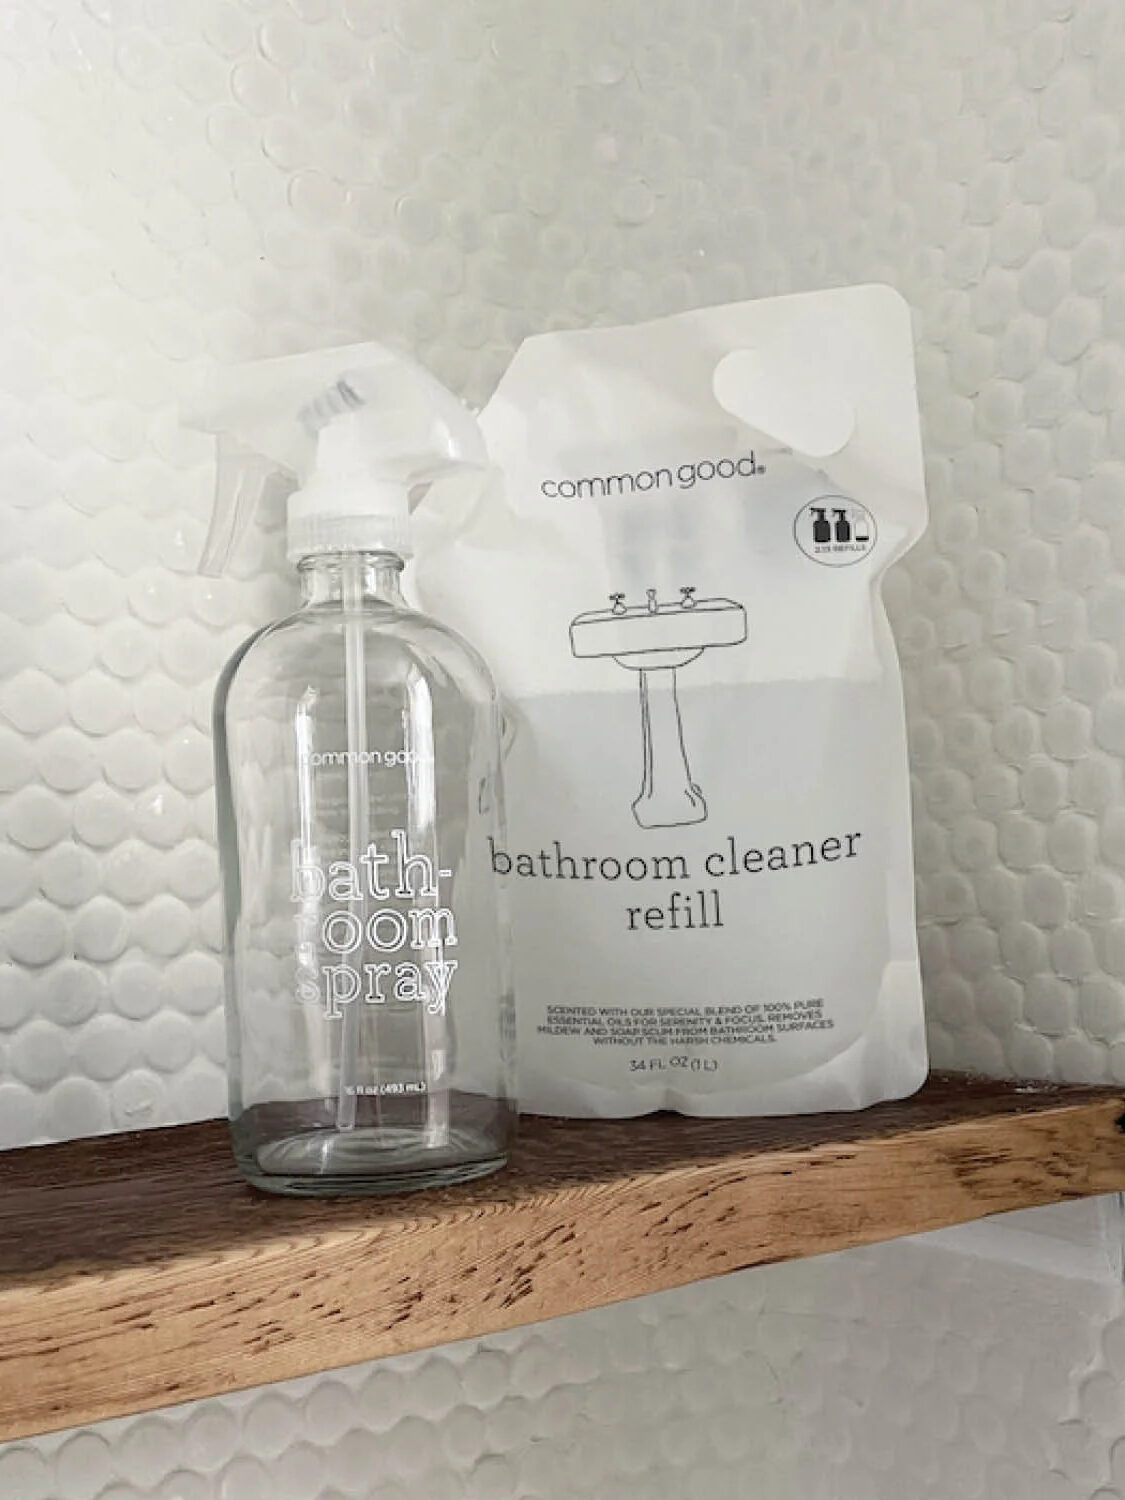 The Best Eco-Friendly Bathroom & Kitchen Cleaners – Safe Household Cleaning